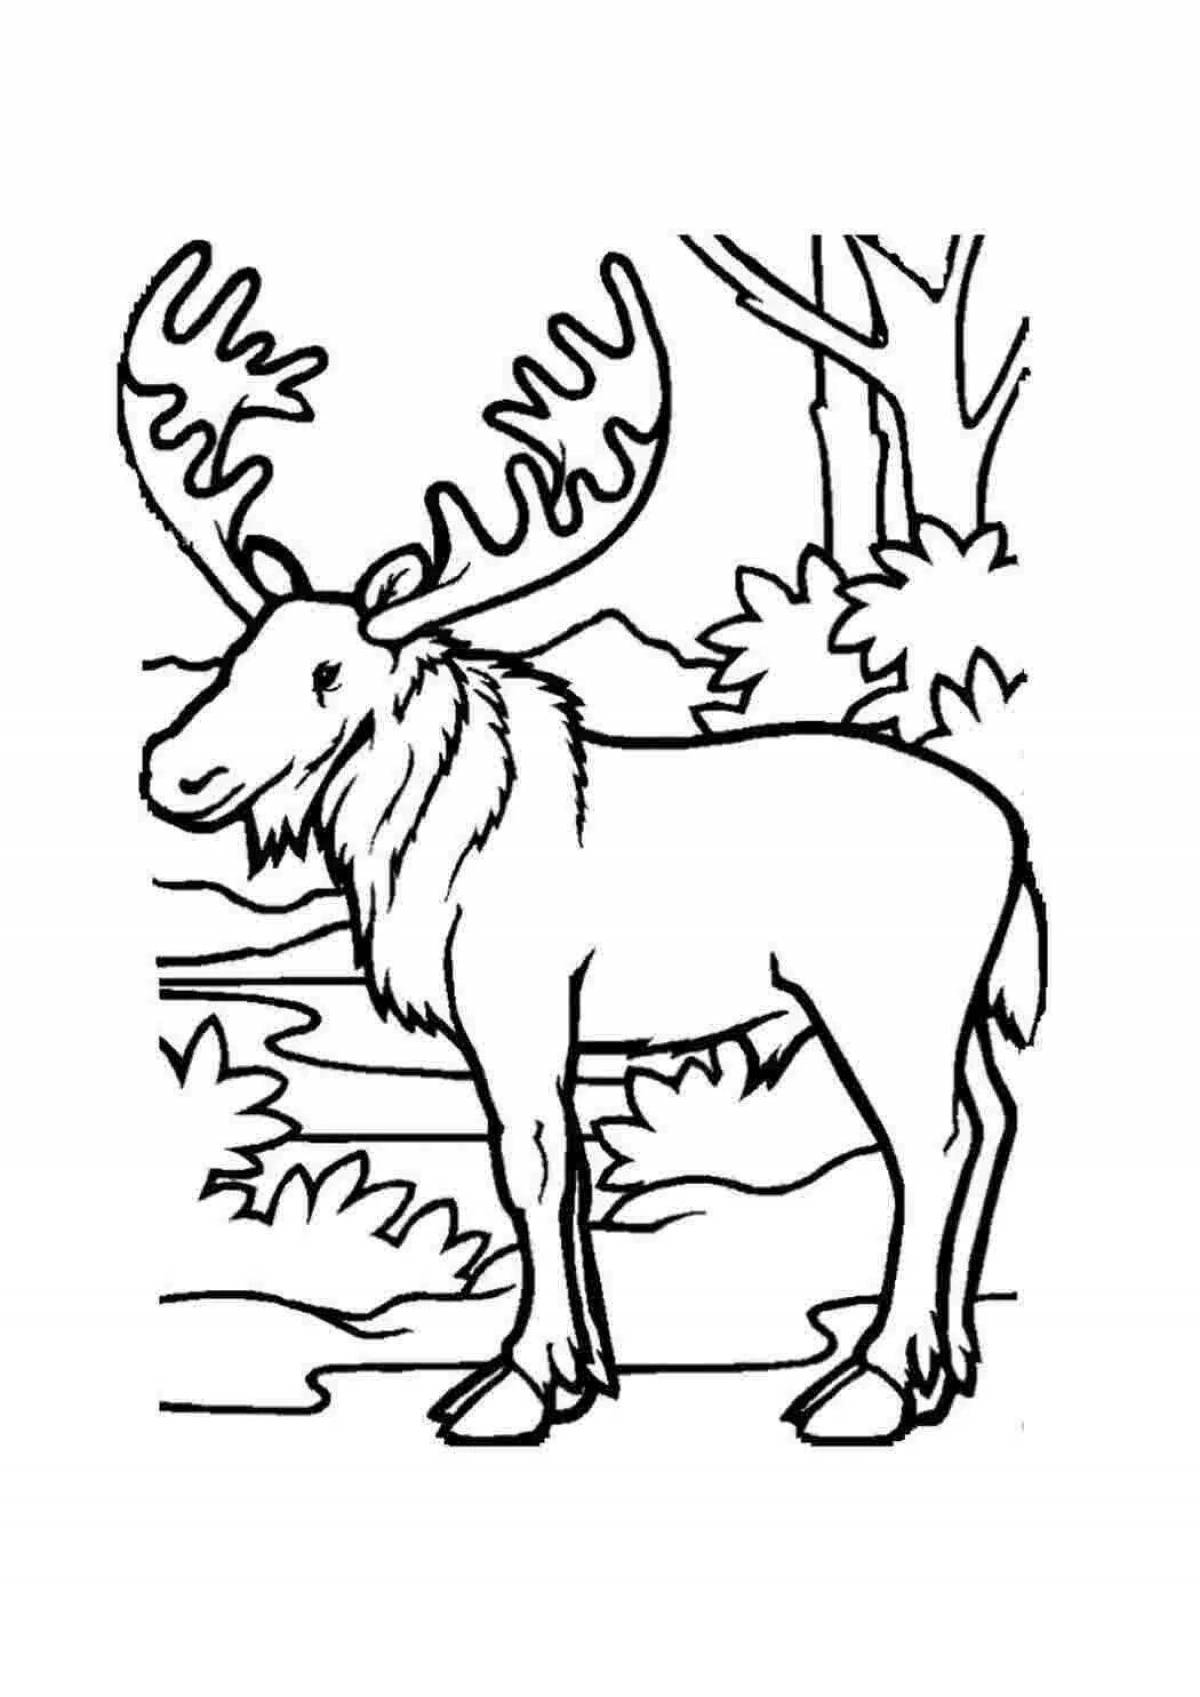 Fun coloring book of forest animals for 6-7 year olds